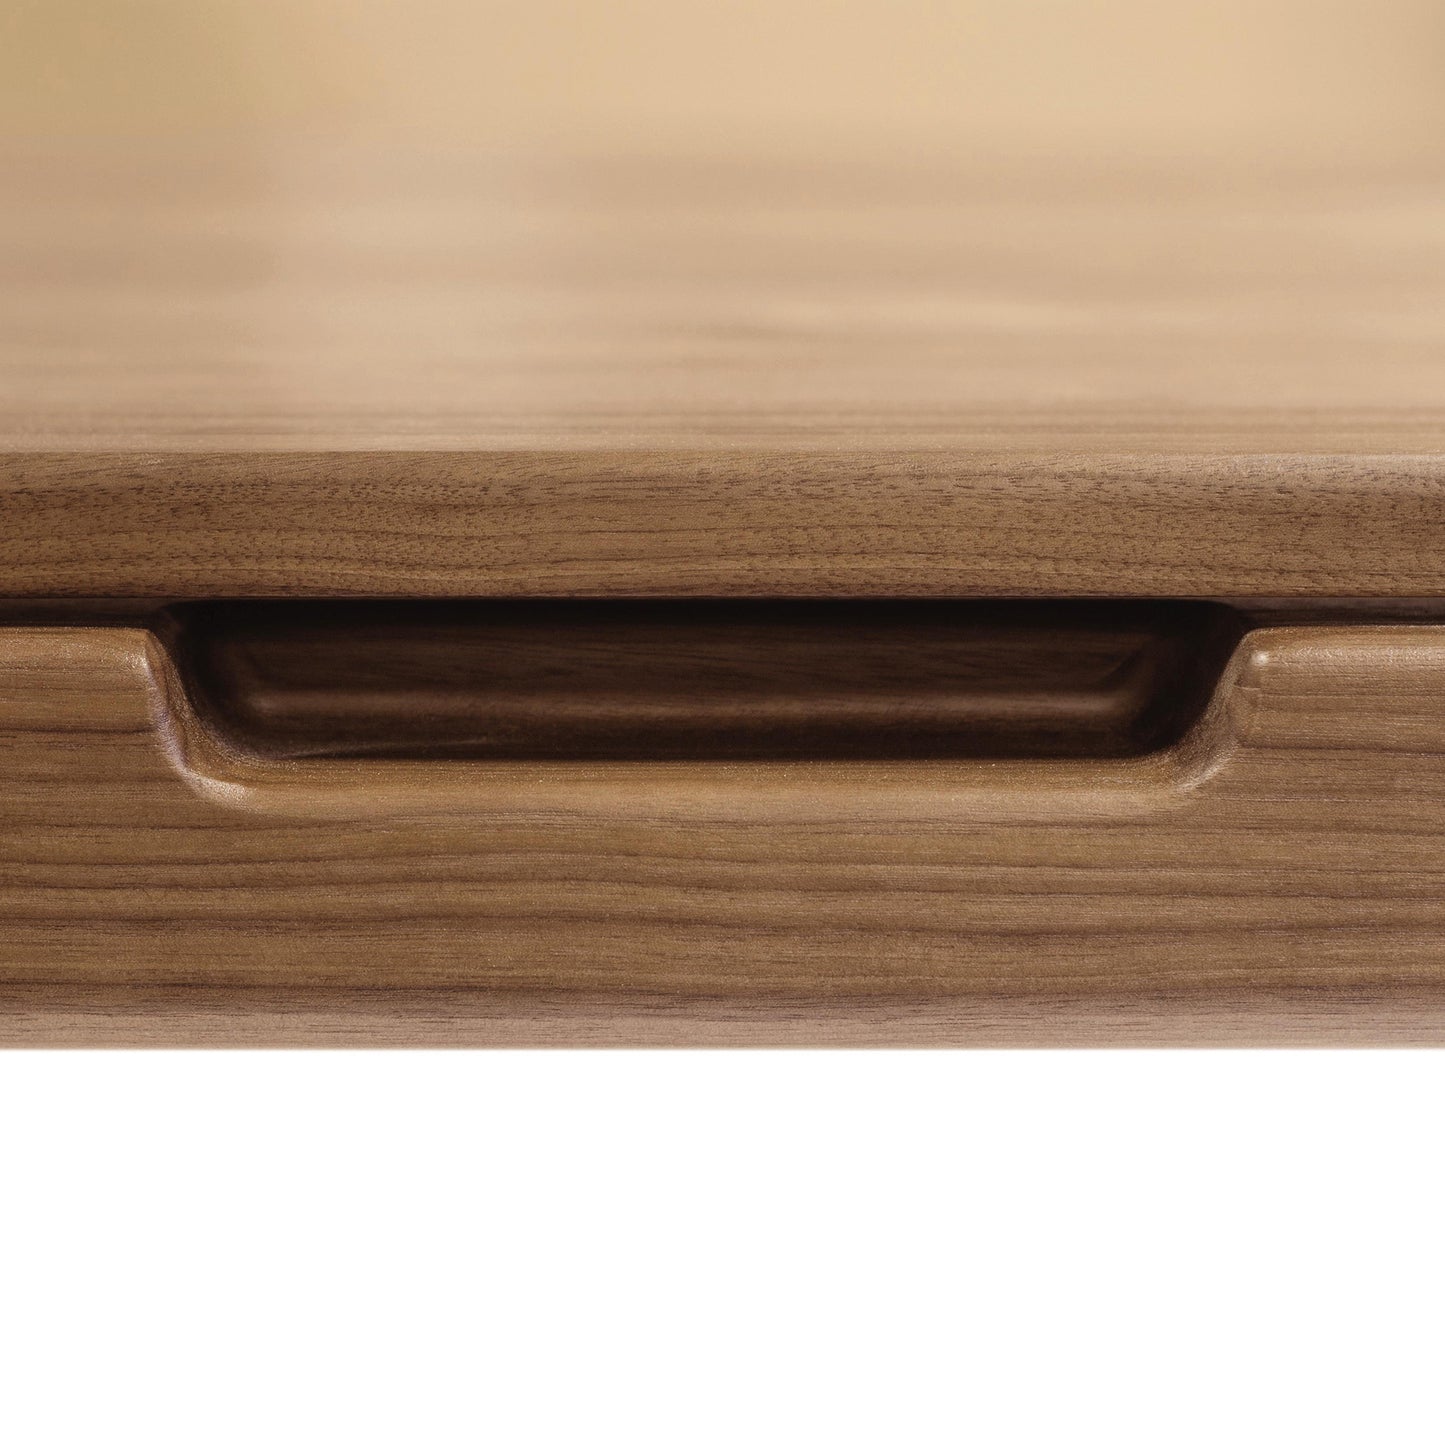 Close-up of a Lisse Extension Dining Table with a recessed pull handle by Copeland Furniture.